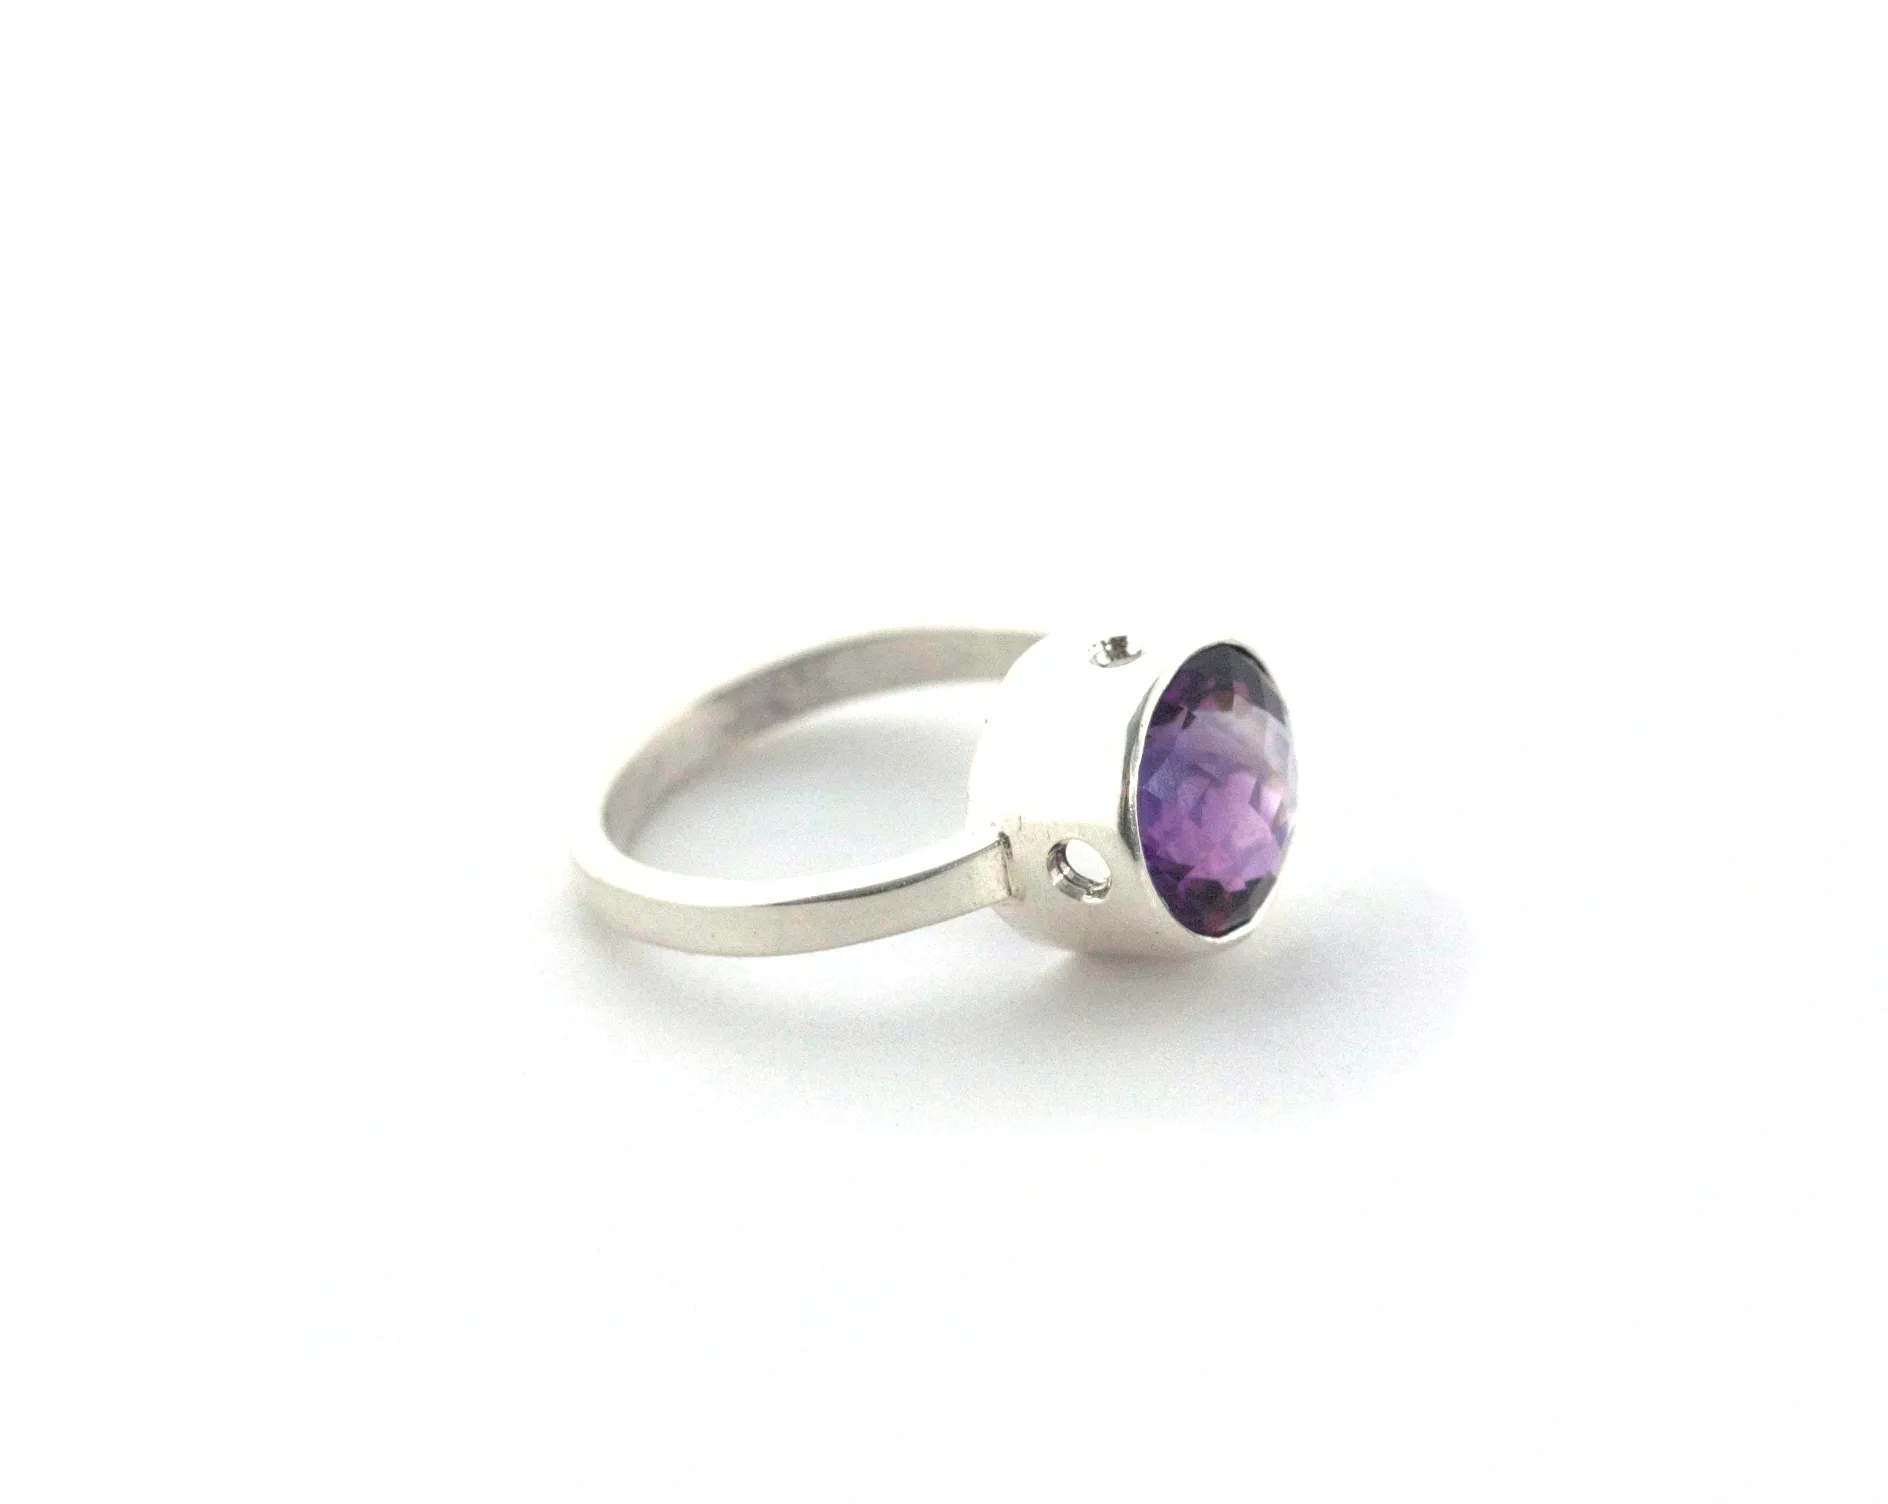 A purple ring is sitting on top of a white surface.